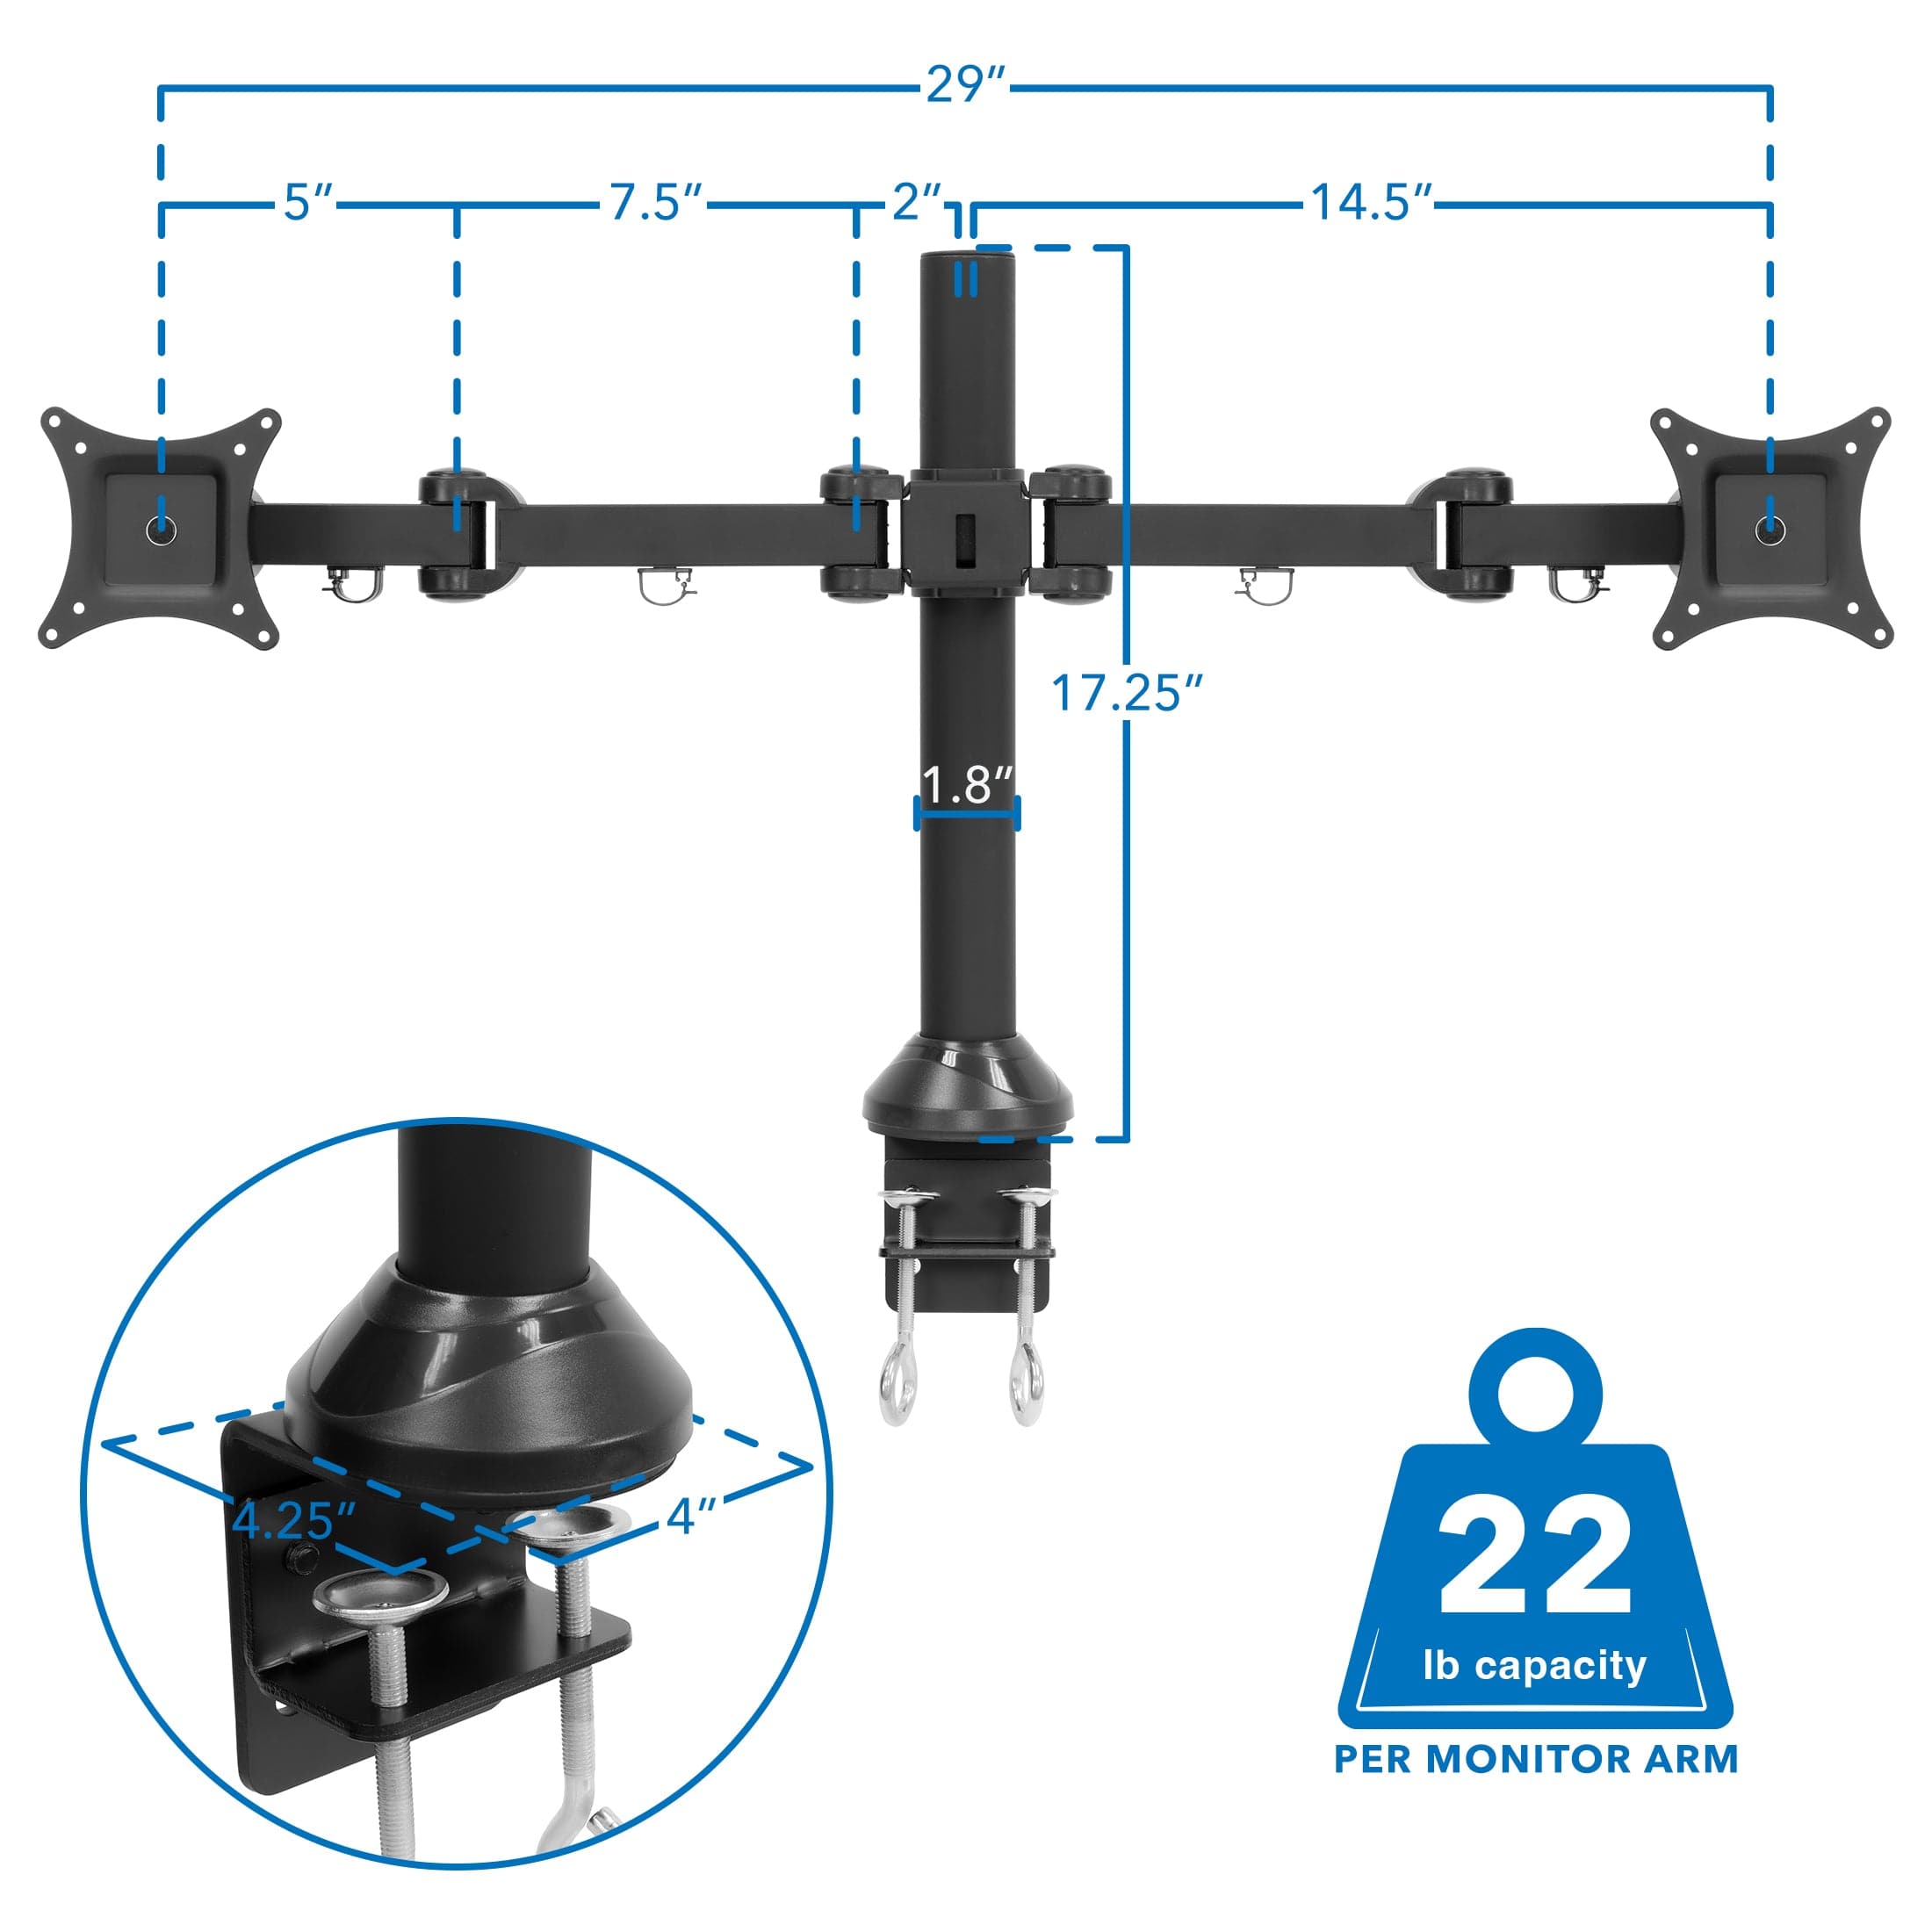 Dual Monitor Desk Mount for 13-27 Inch Screens